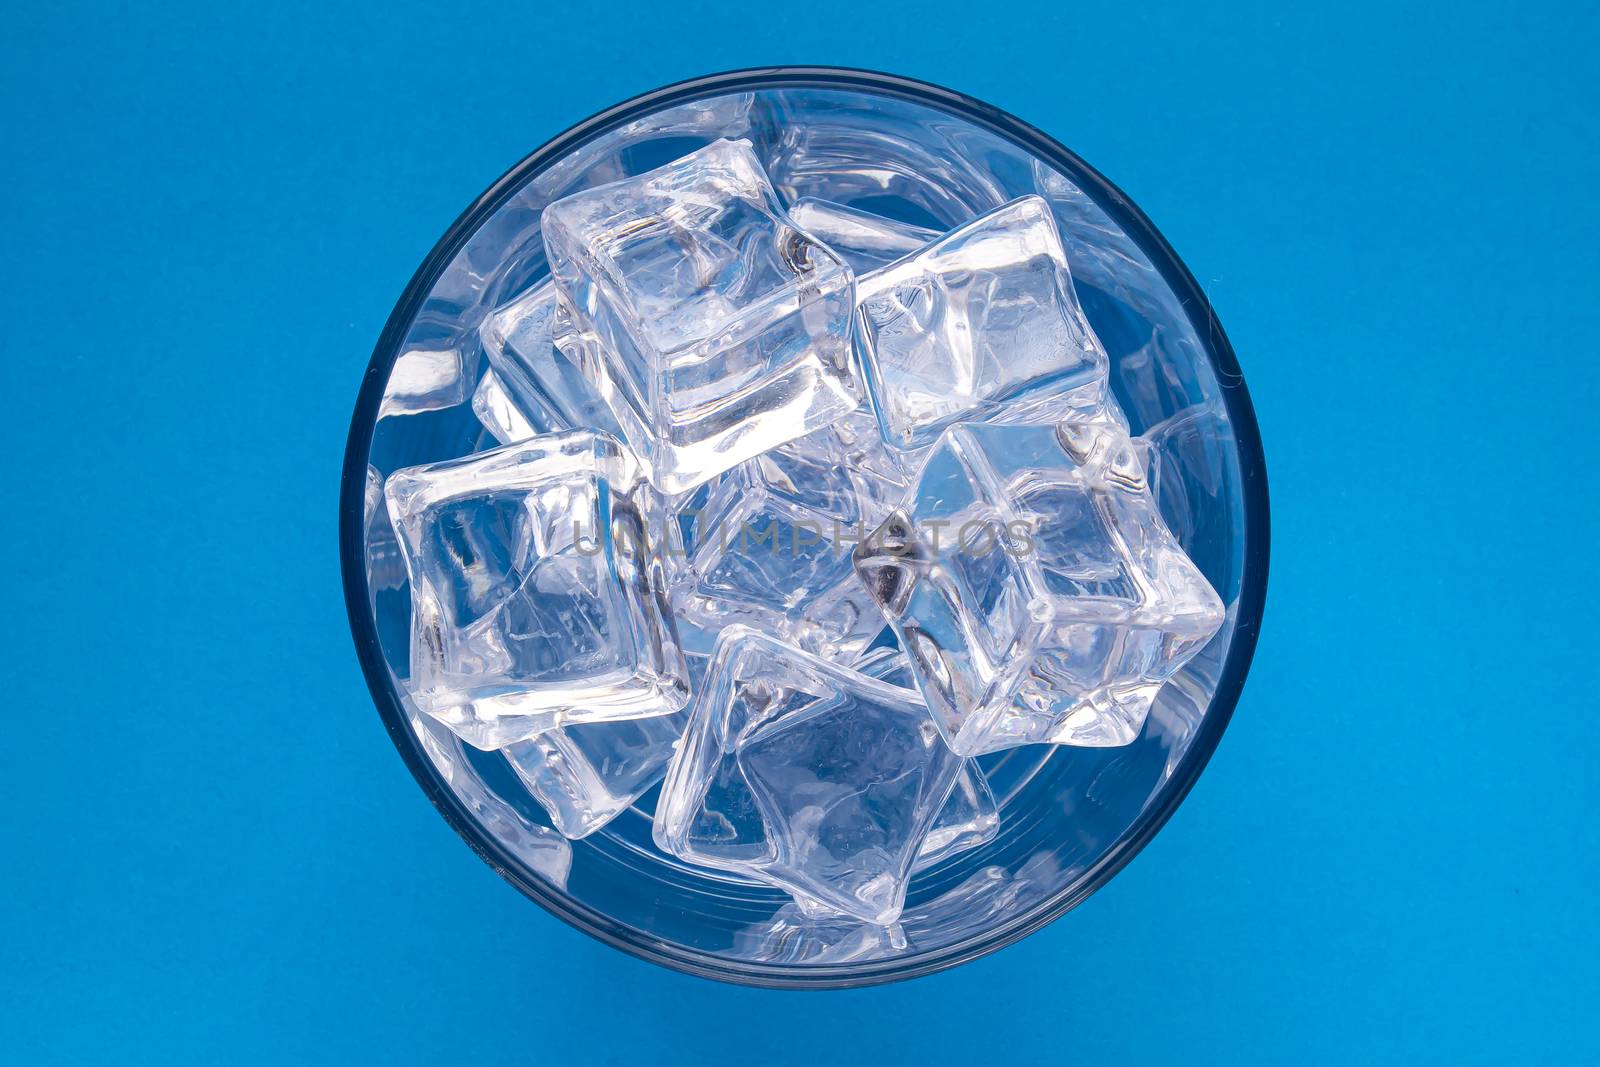 Regular scotch glass with crystal Ice cubes on a blue background